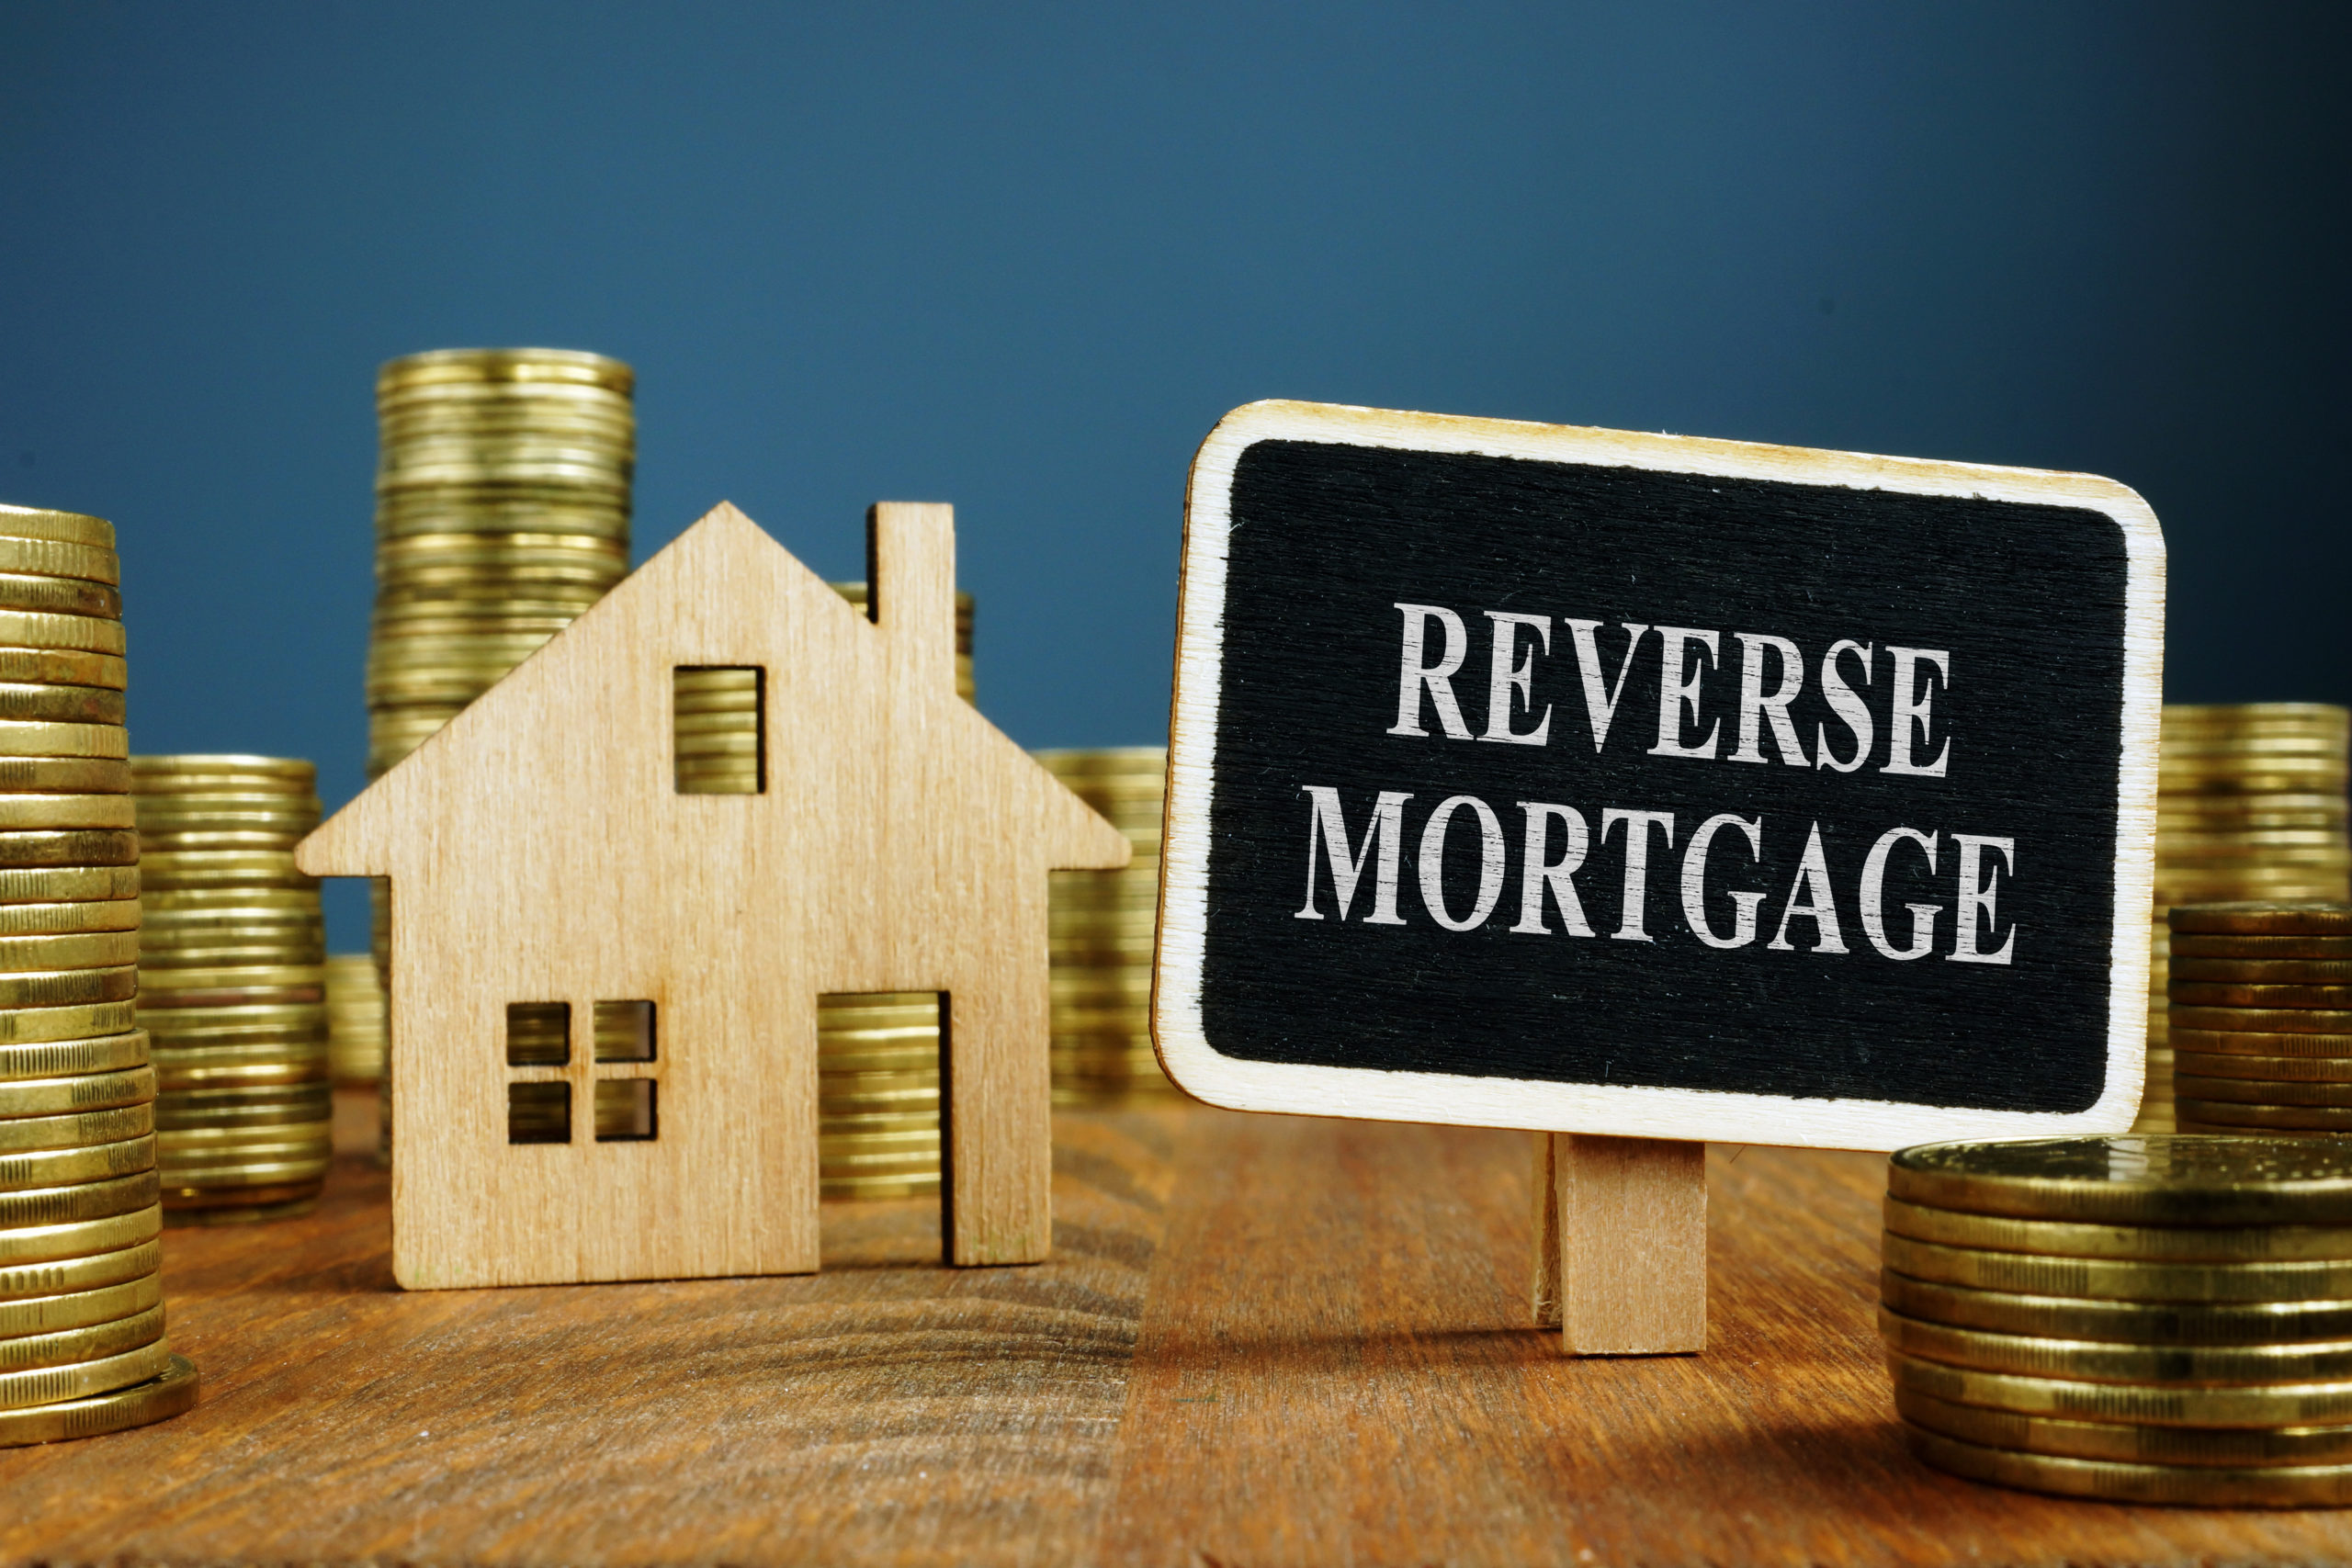 Is a Reverse Mortgage Bad?